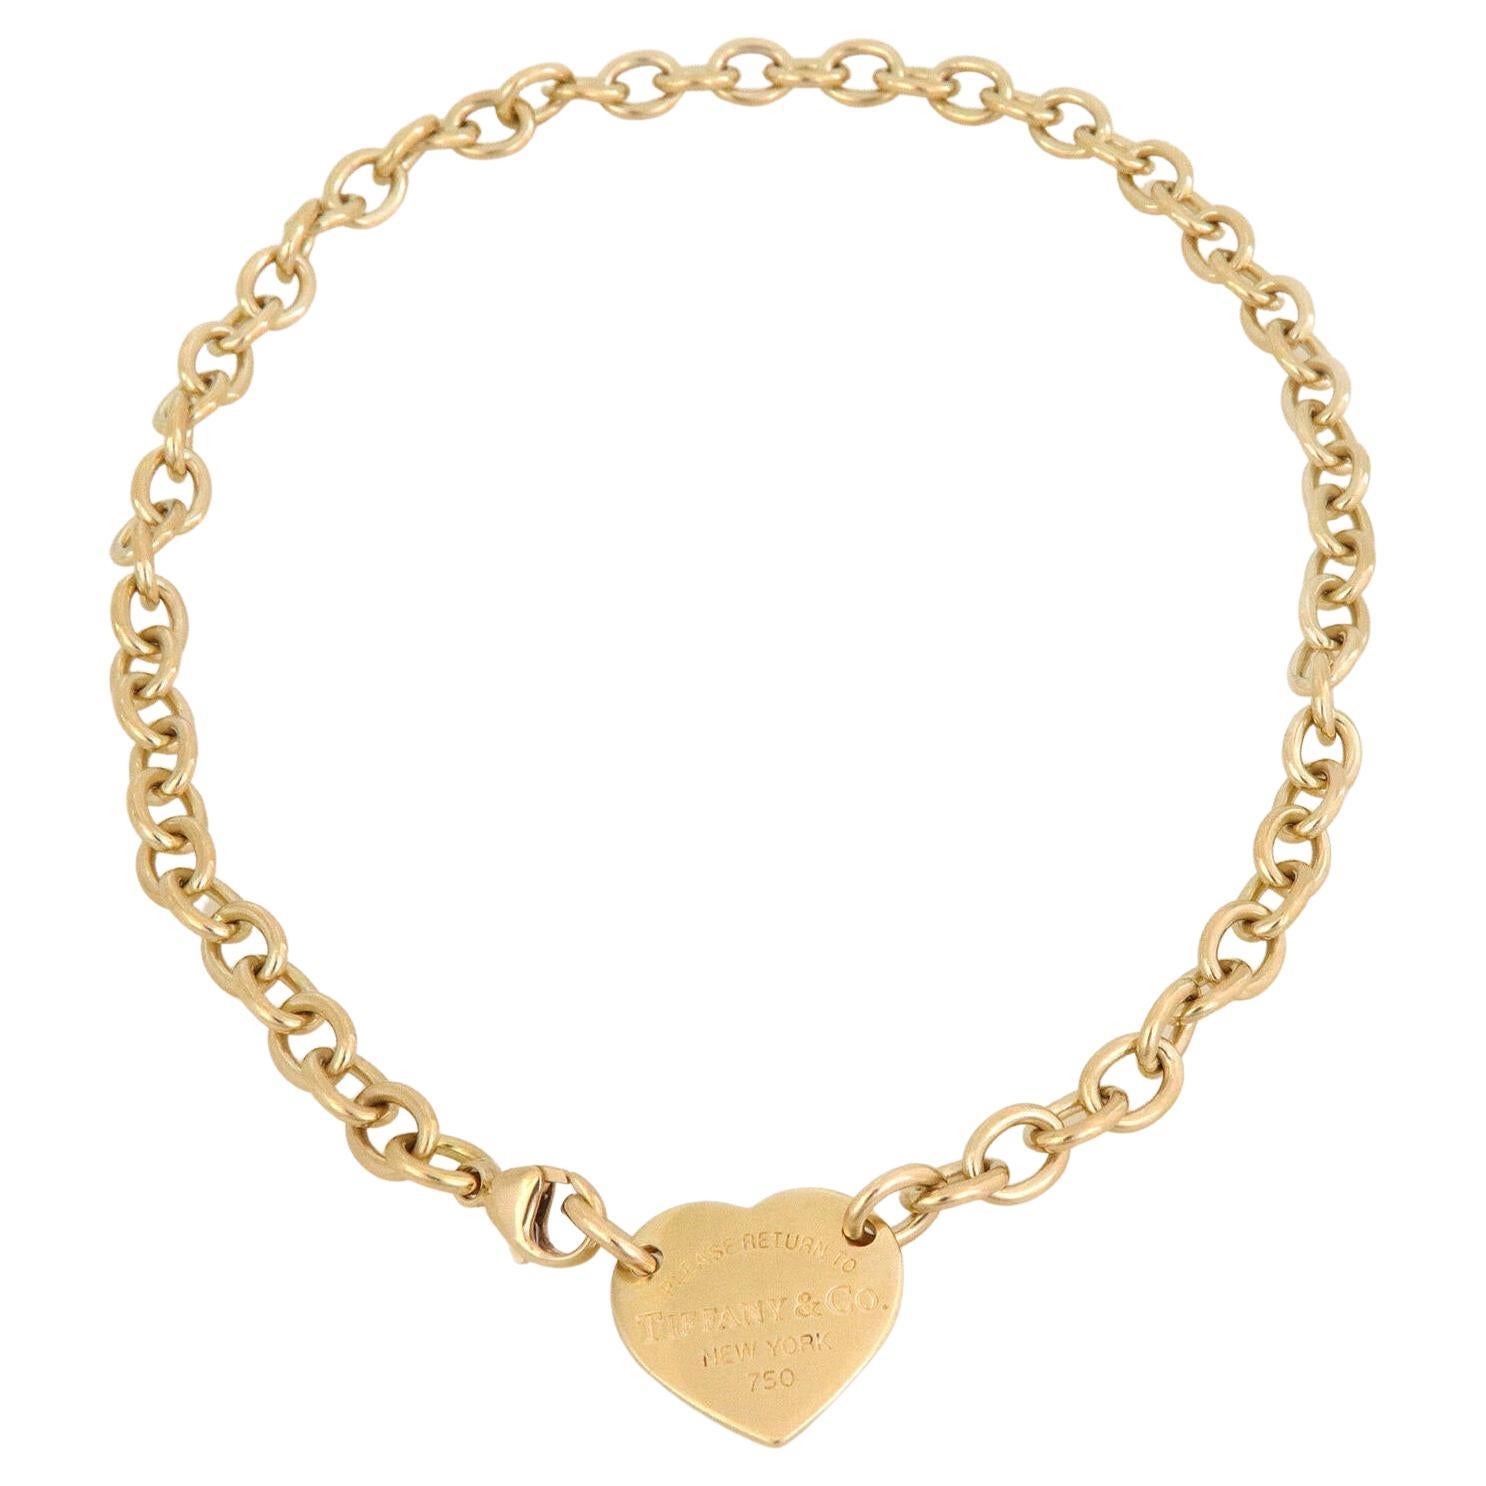 Tiffany & Co. Please Return 18k Yellow Gold Heart Tag Pendant Necklace